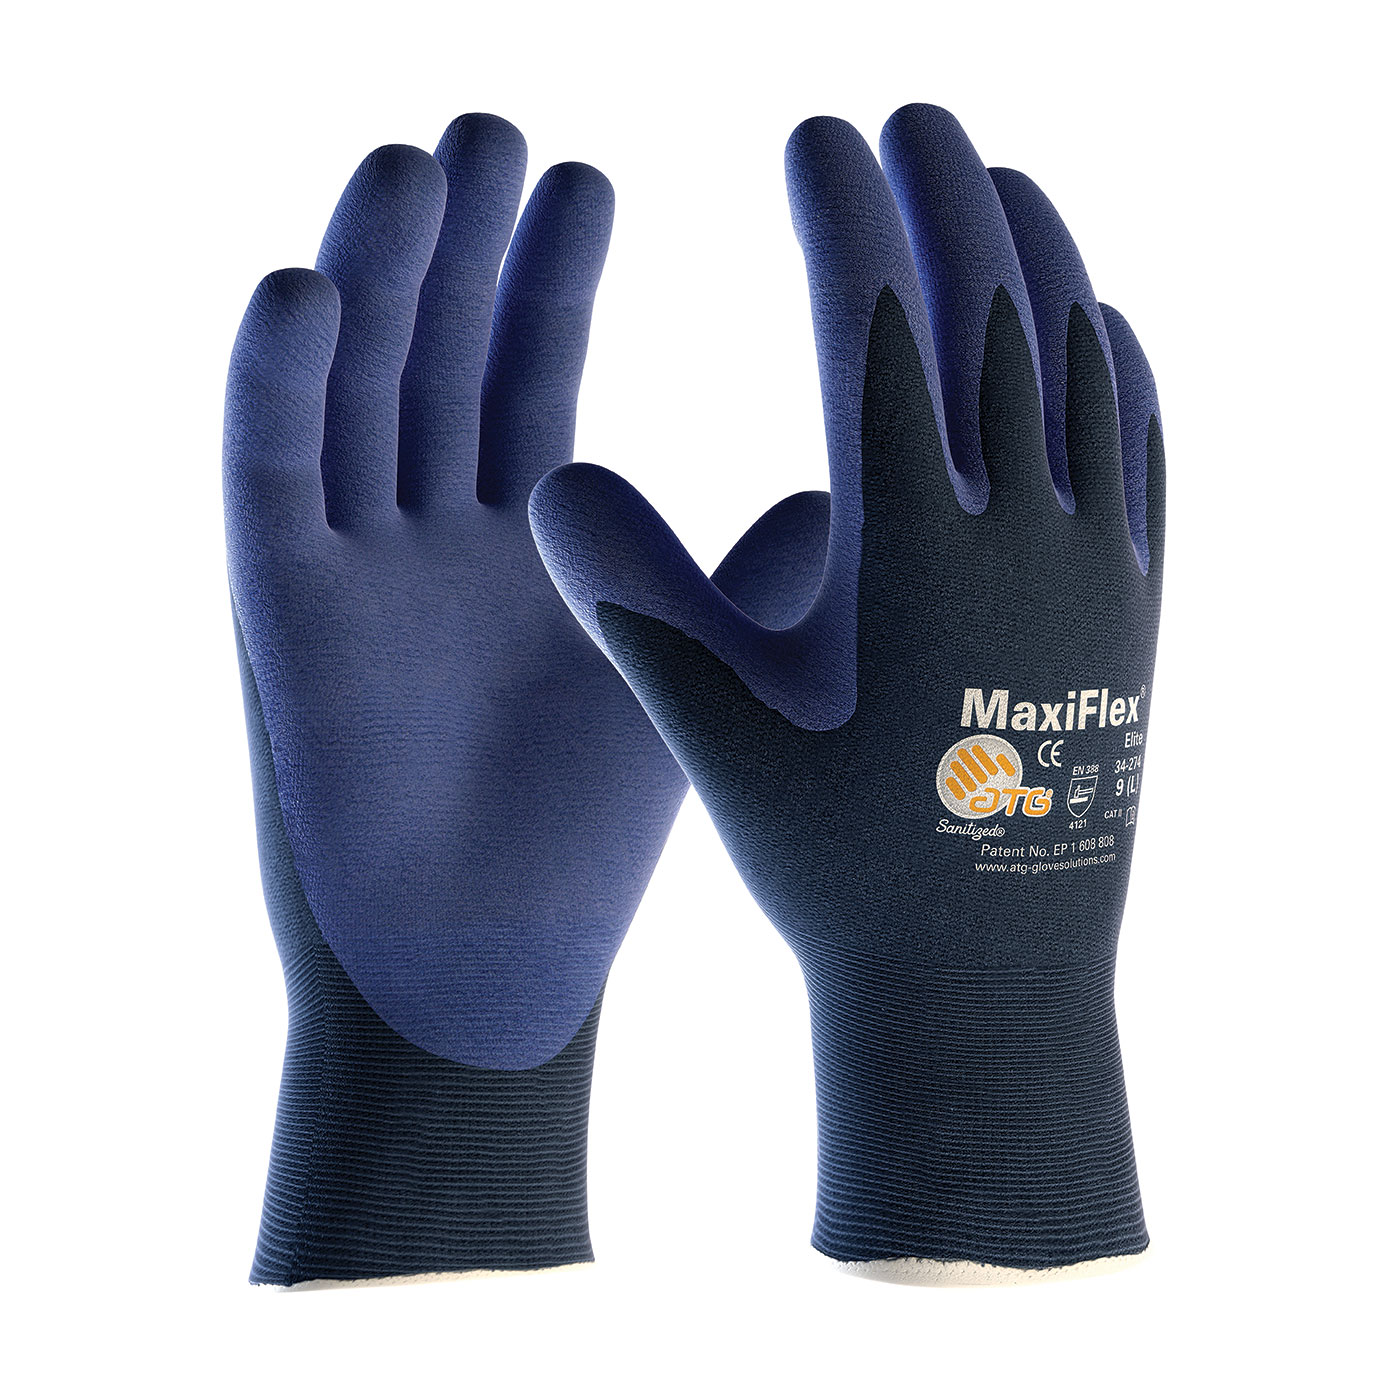 ULTRA LIGHT WEIGHT SEAMLESS KNIT NYLON GLOVE WITH NITRILE COATED MICROFOAM GRIP ON PALM & FINGERS